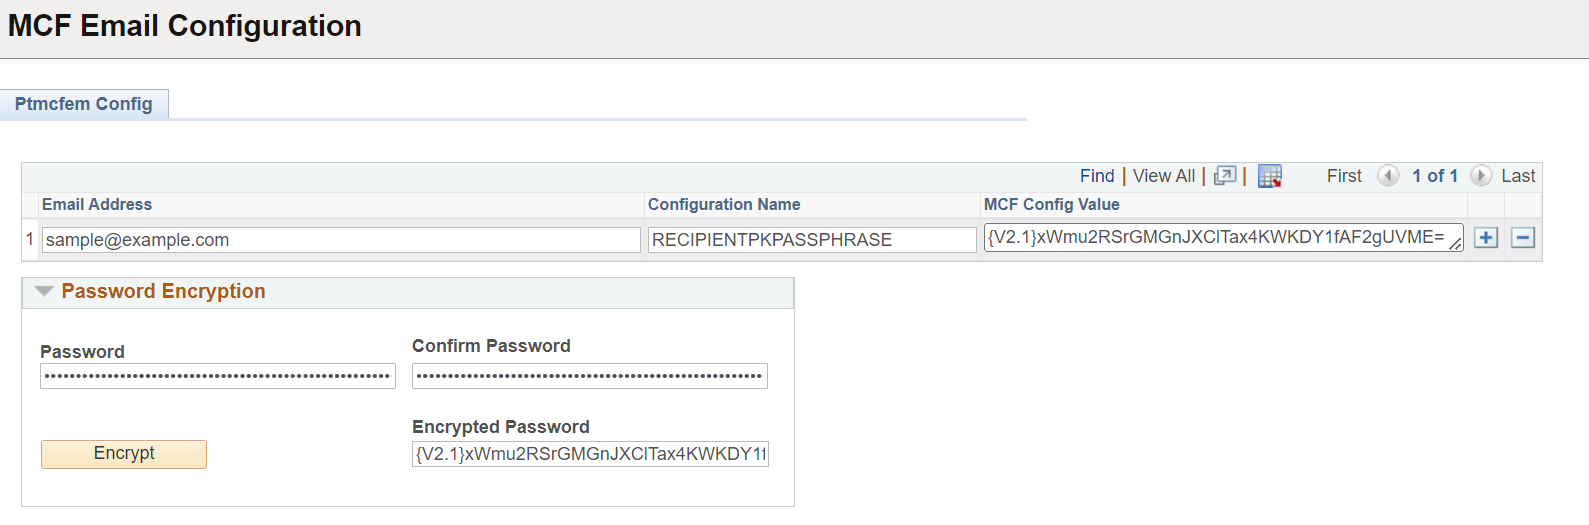 MCF Email Configuration page